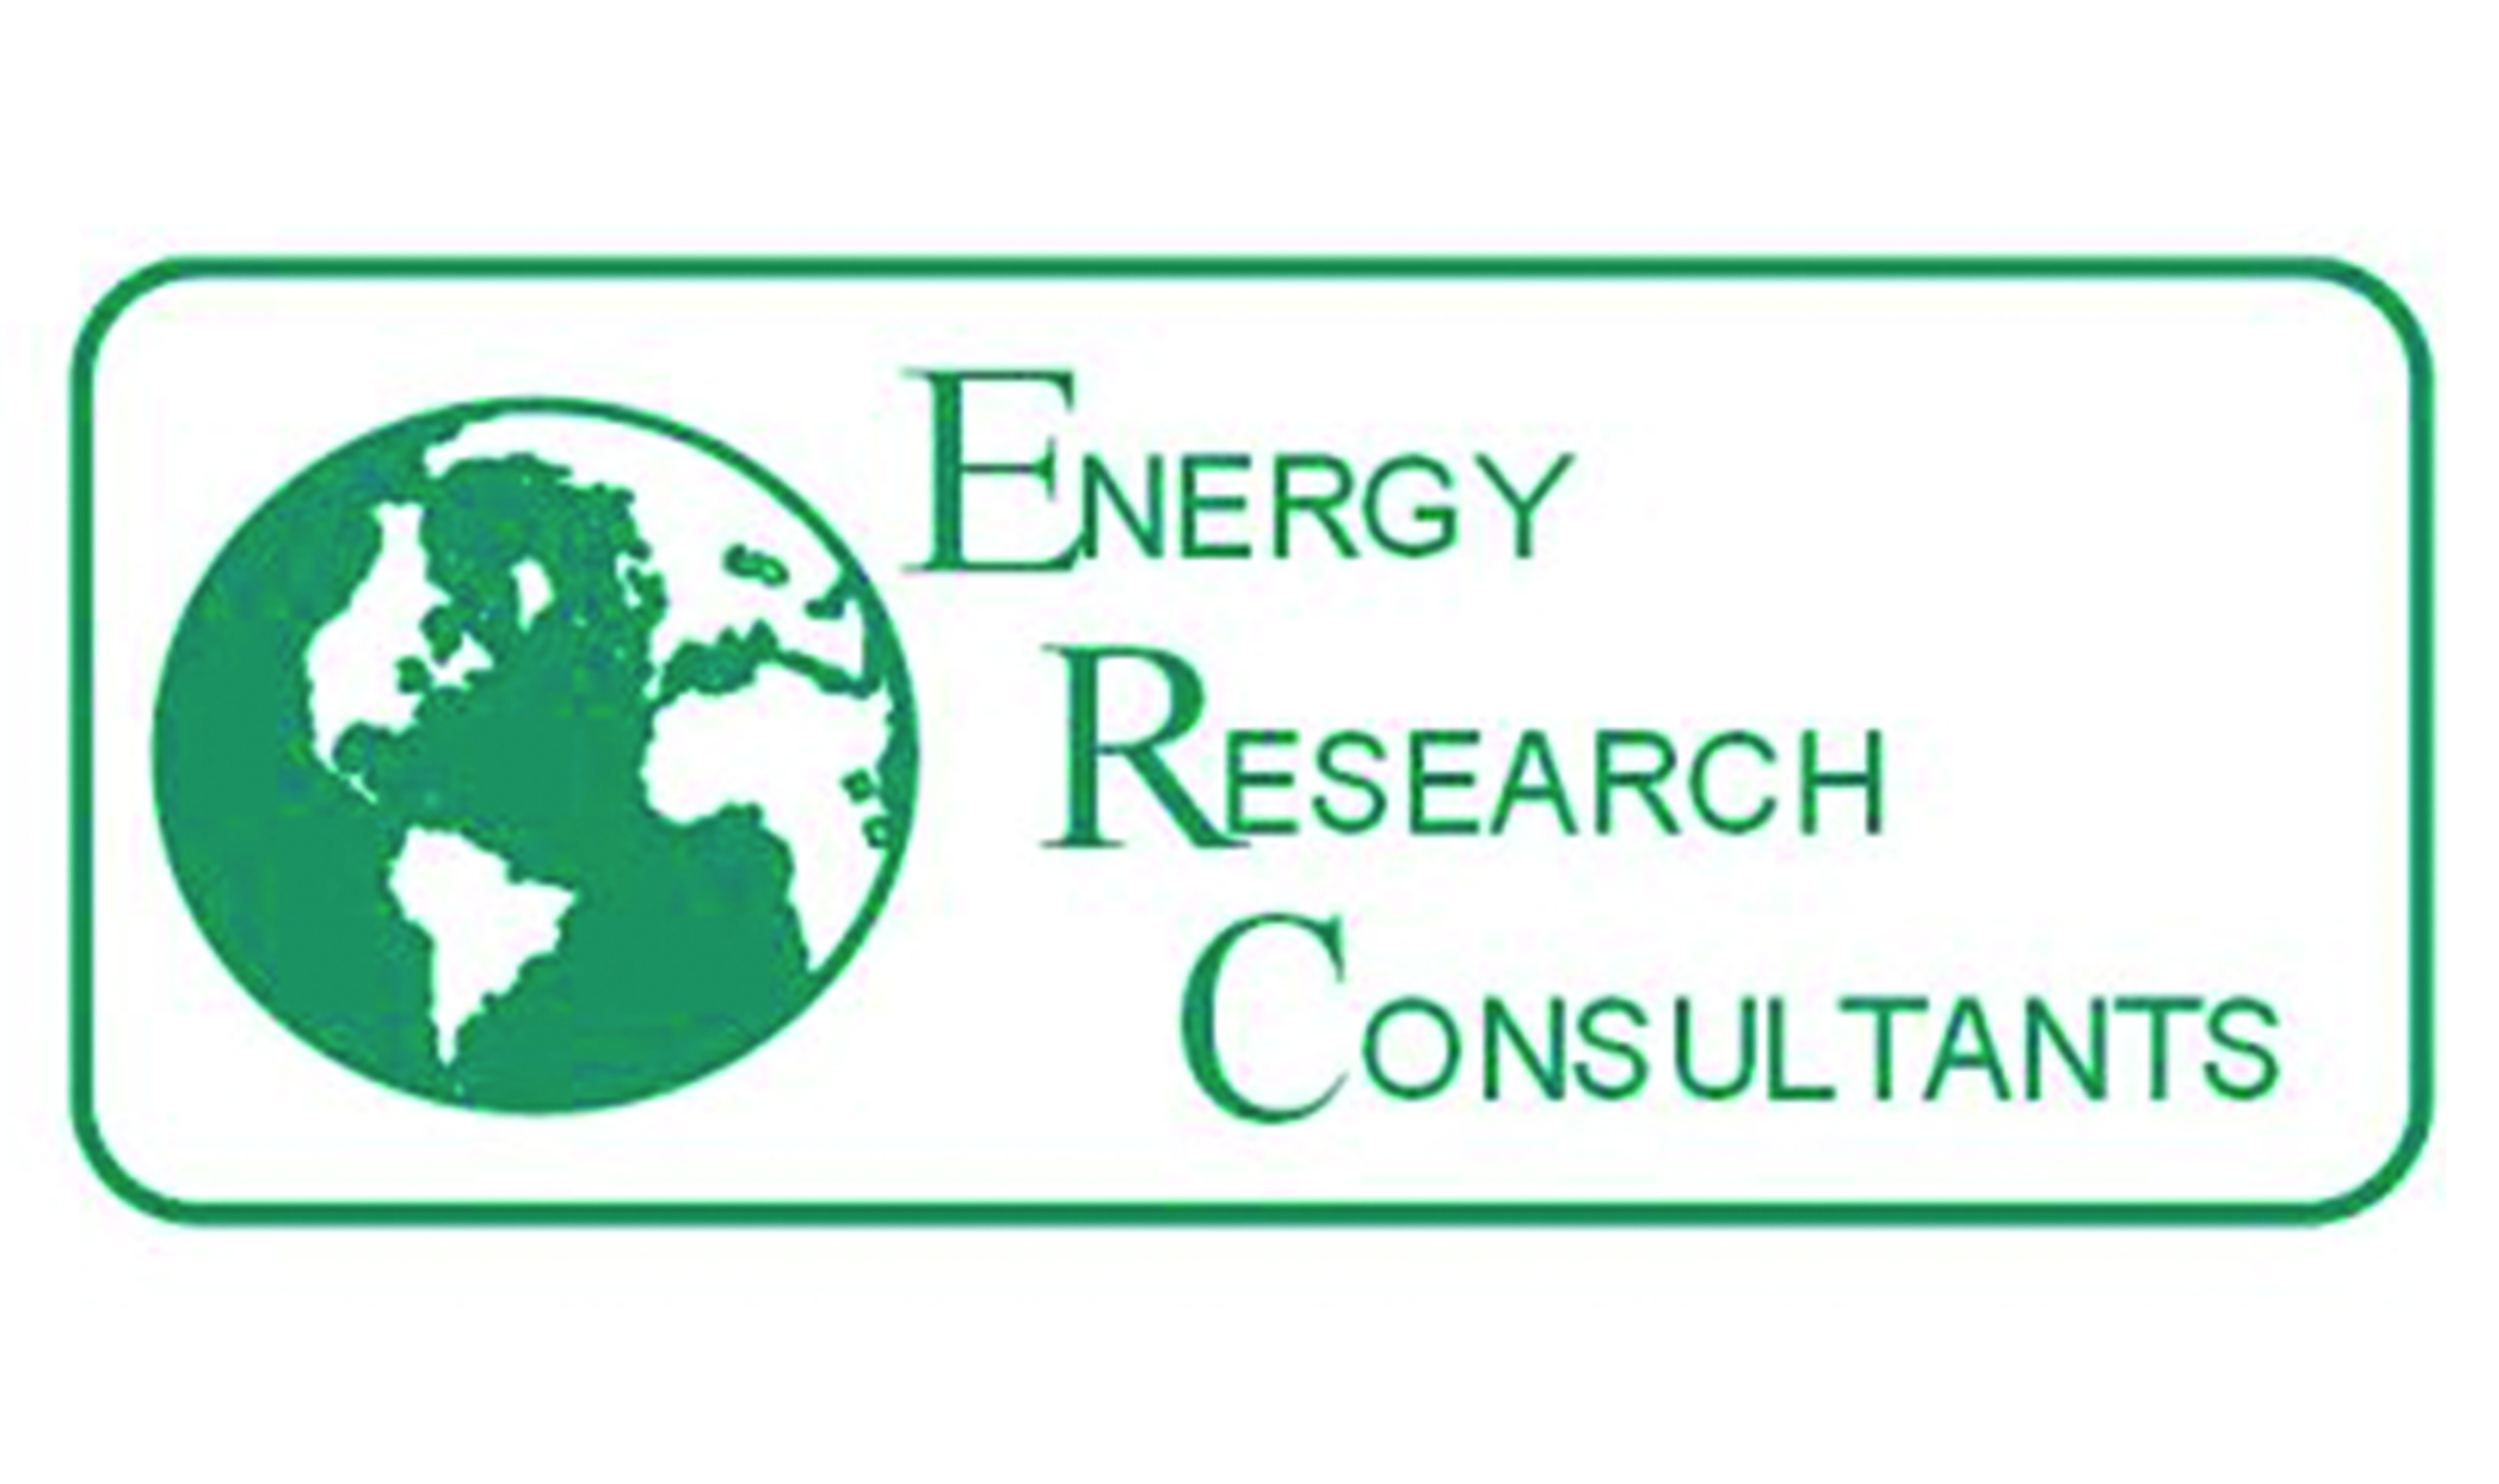 ILASS 2018 Chicago Exhibitor Energy Research Consultants